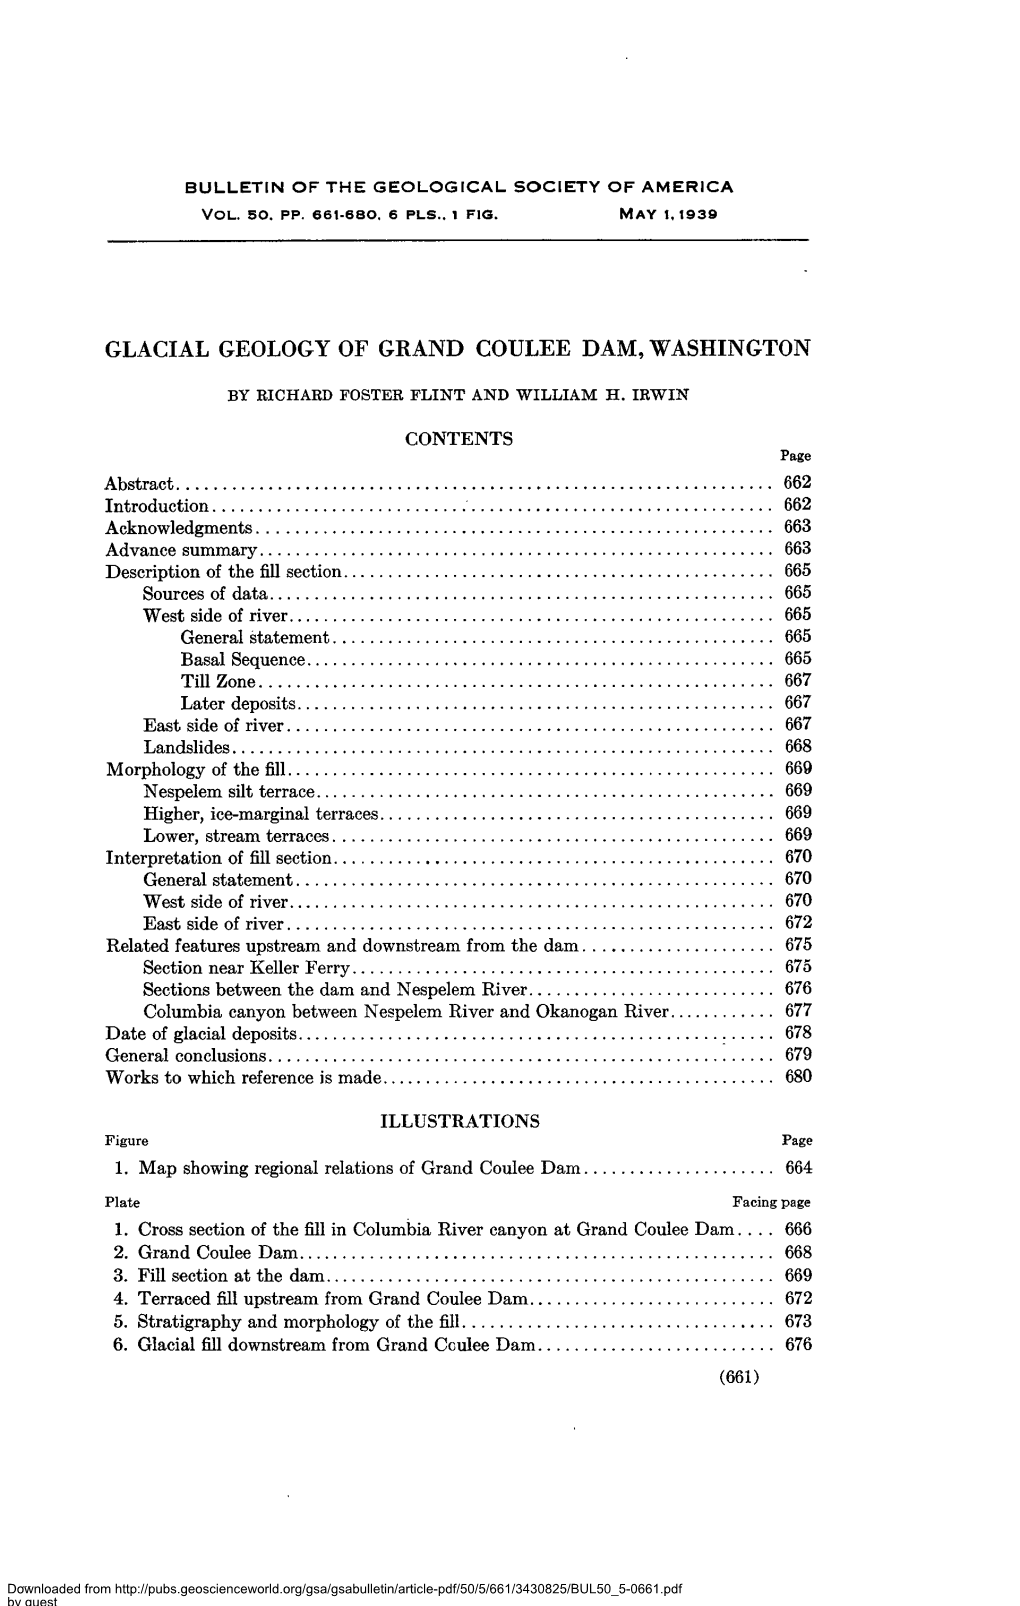 Glacial Geology of Grand Coulee Dam, Washington by Richard Foster Flint and William H